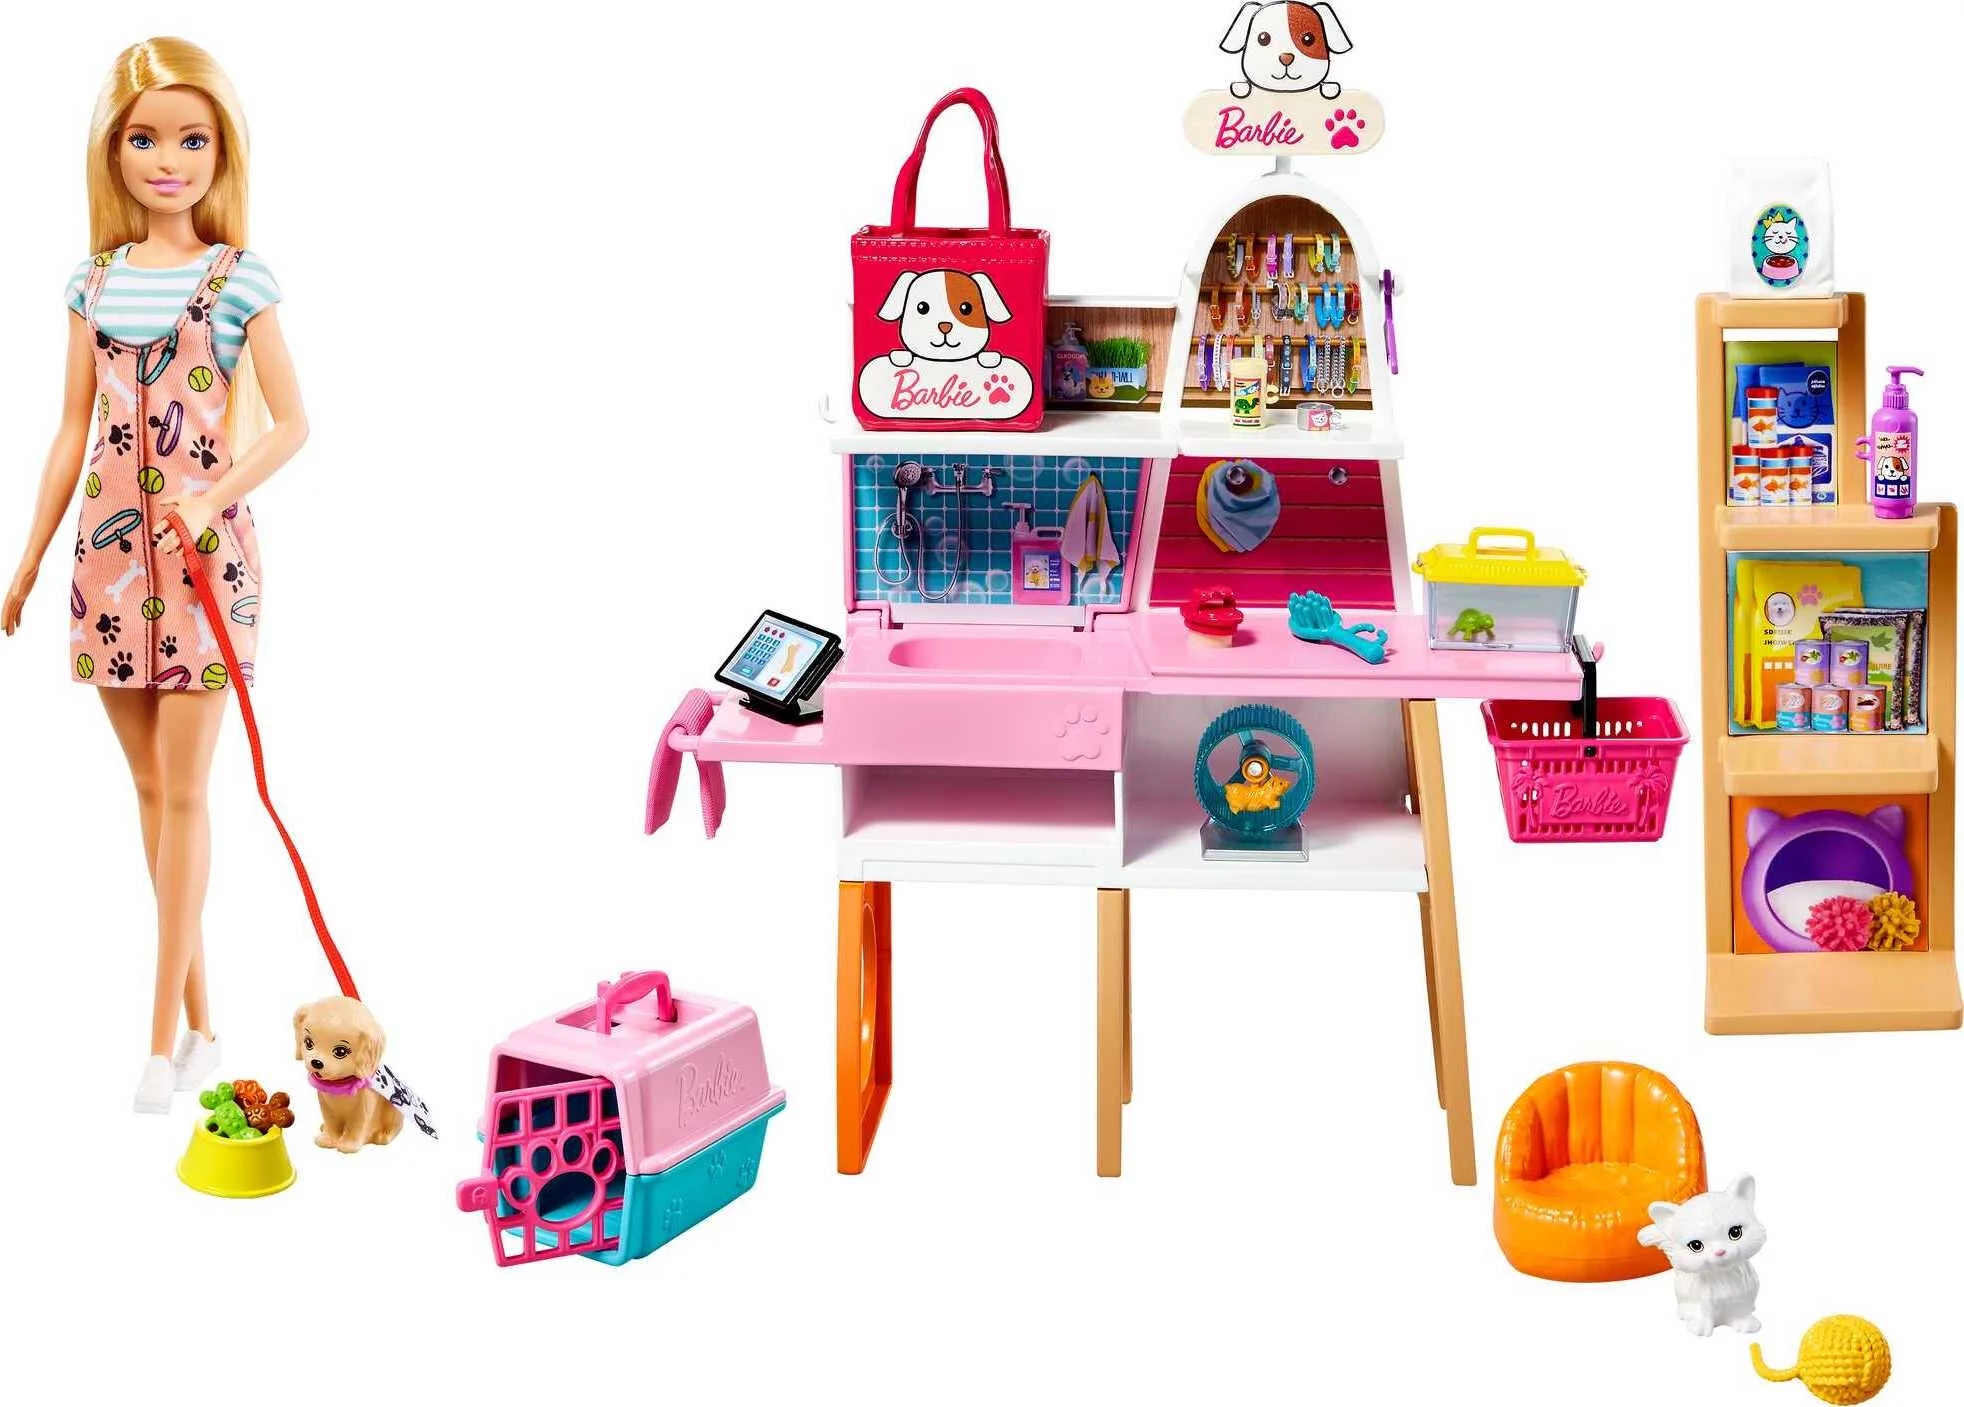 Barbie Doll and Pet Boutique Playset with 4 Pets, 20+ Themed Accessories and Color Change, Toy 3 Years and Up